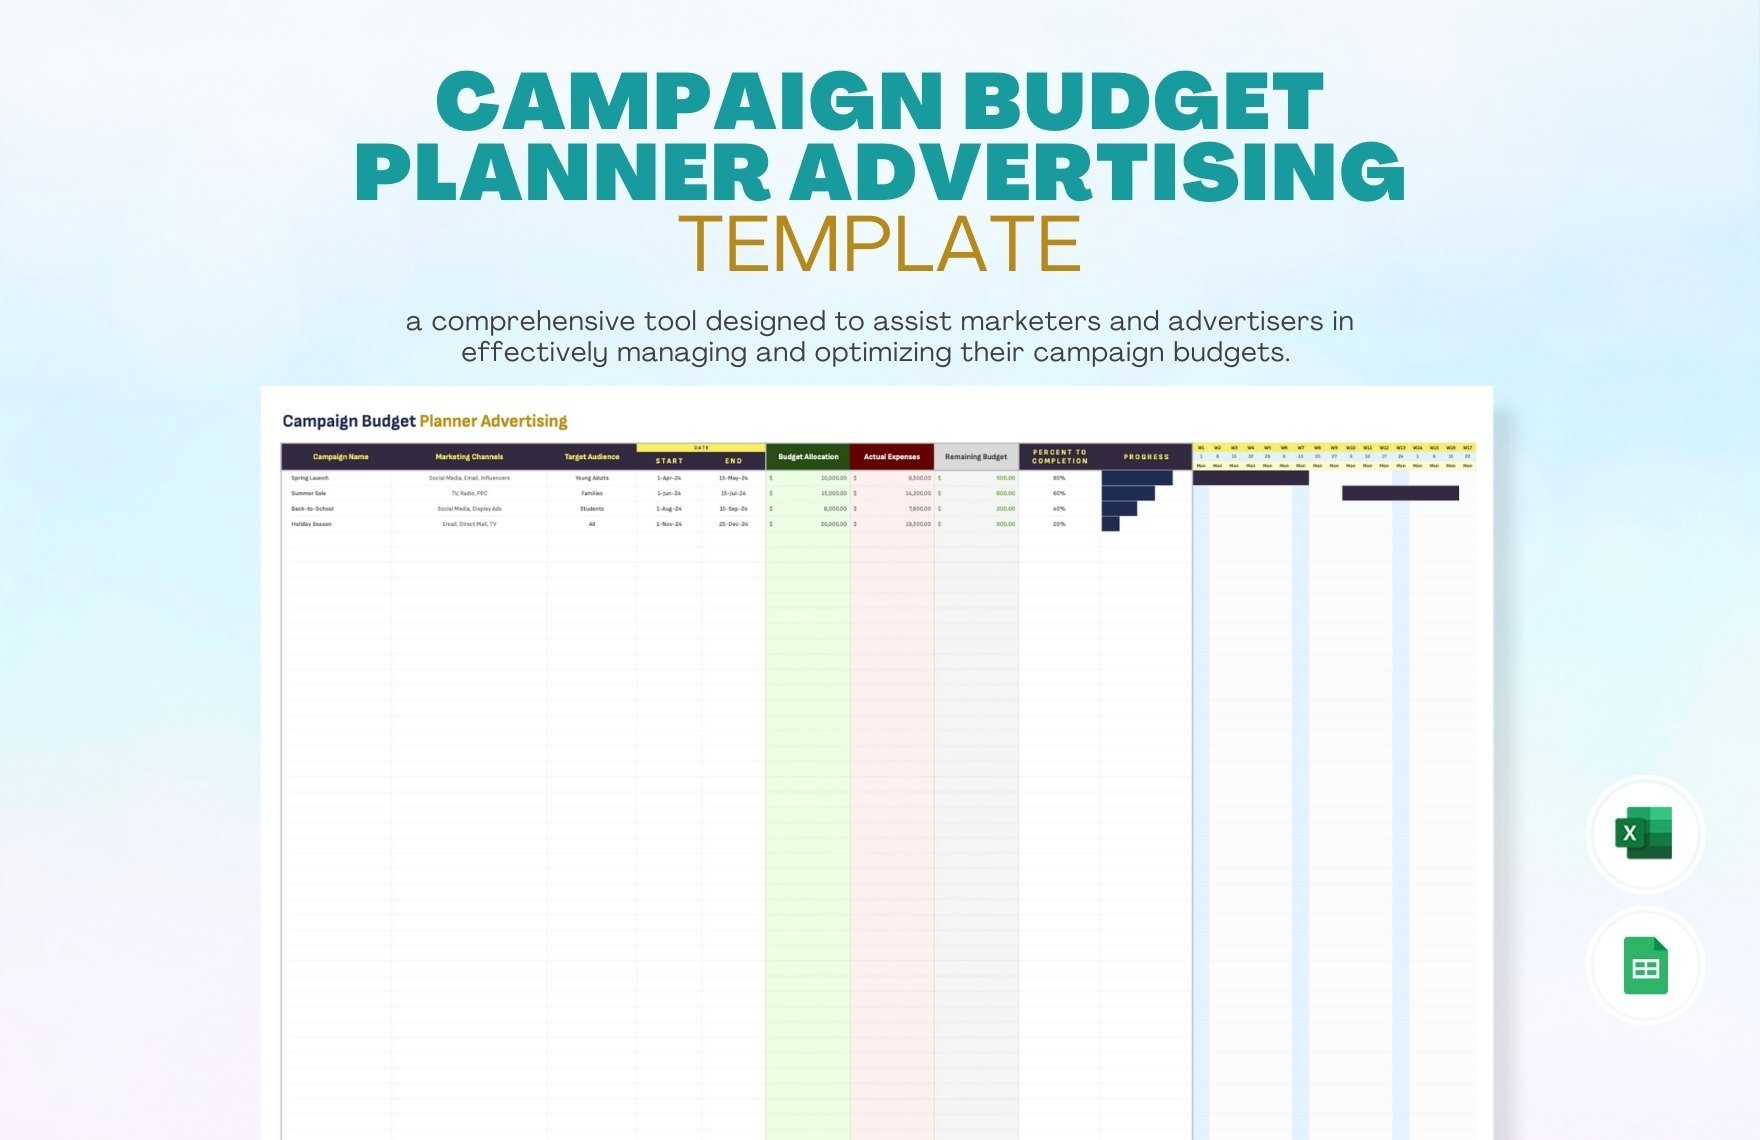 Campaign Budget Planner Advertising Template in Excel, Google Sheets